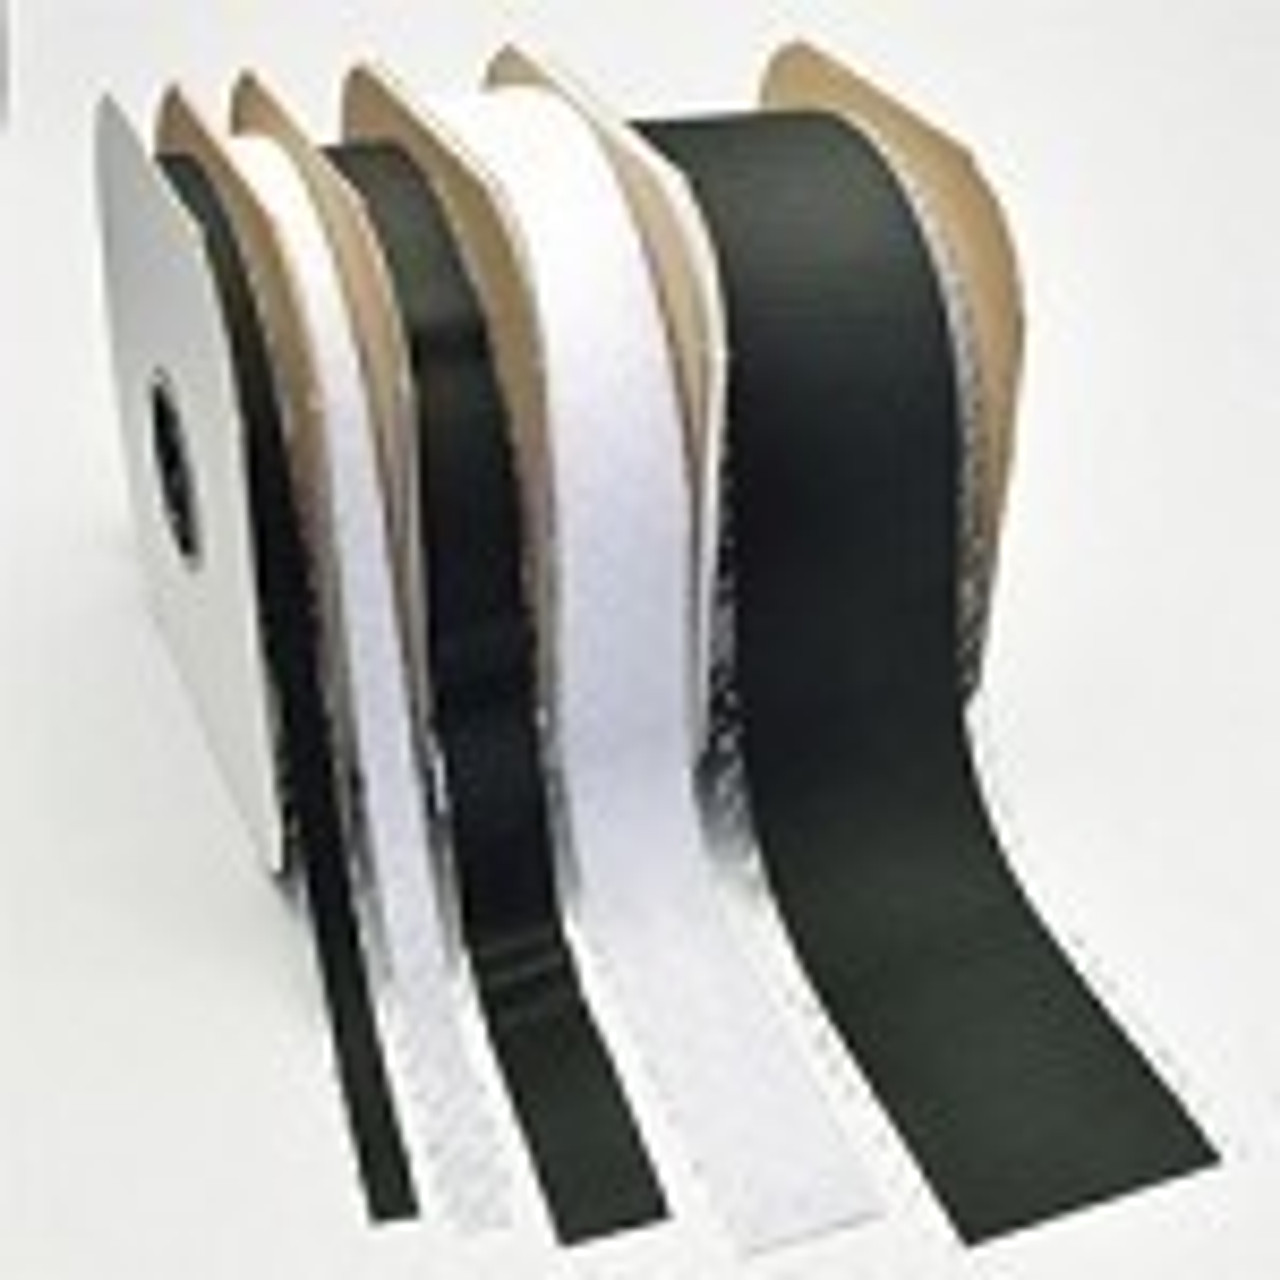 3m adhesive velcro dots, 3m adhesive velcro dots Suppliers and  Manufacturers at